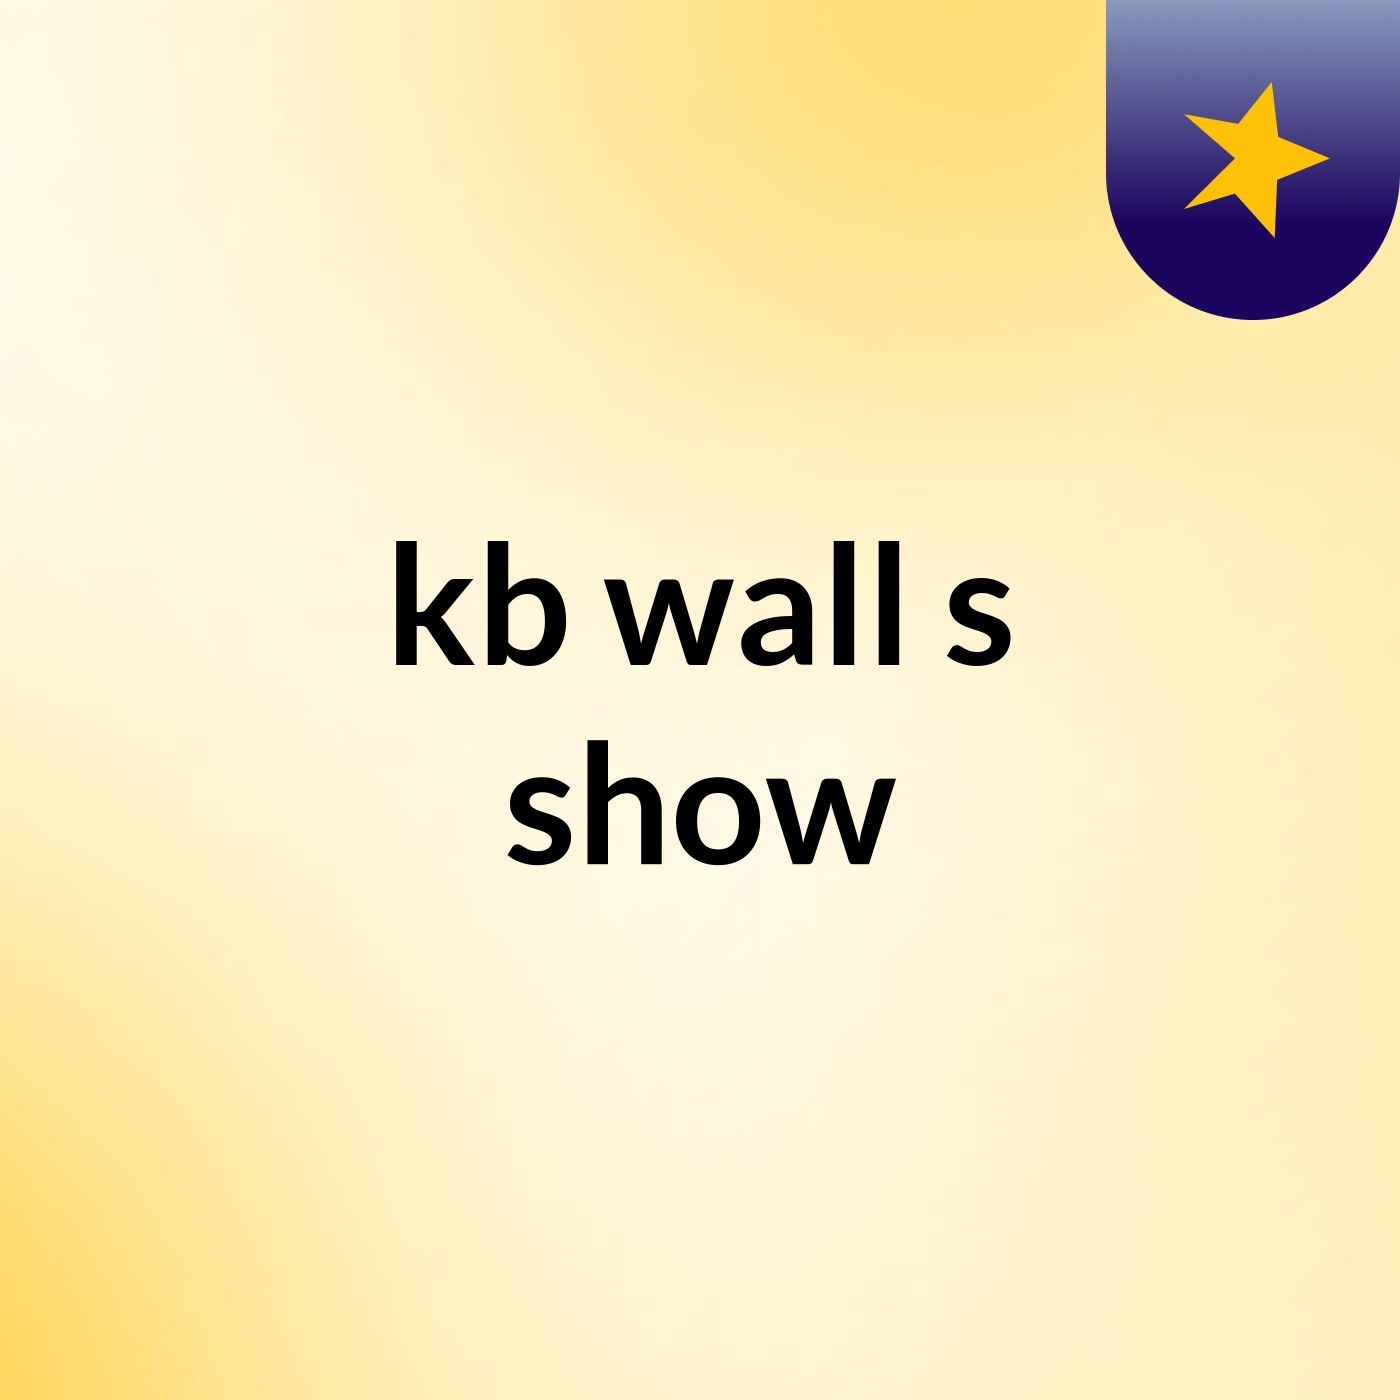 kb wall's show